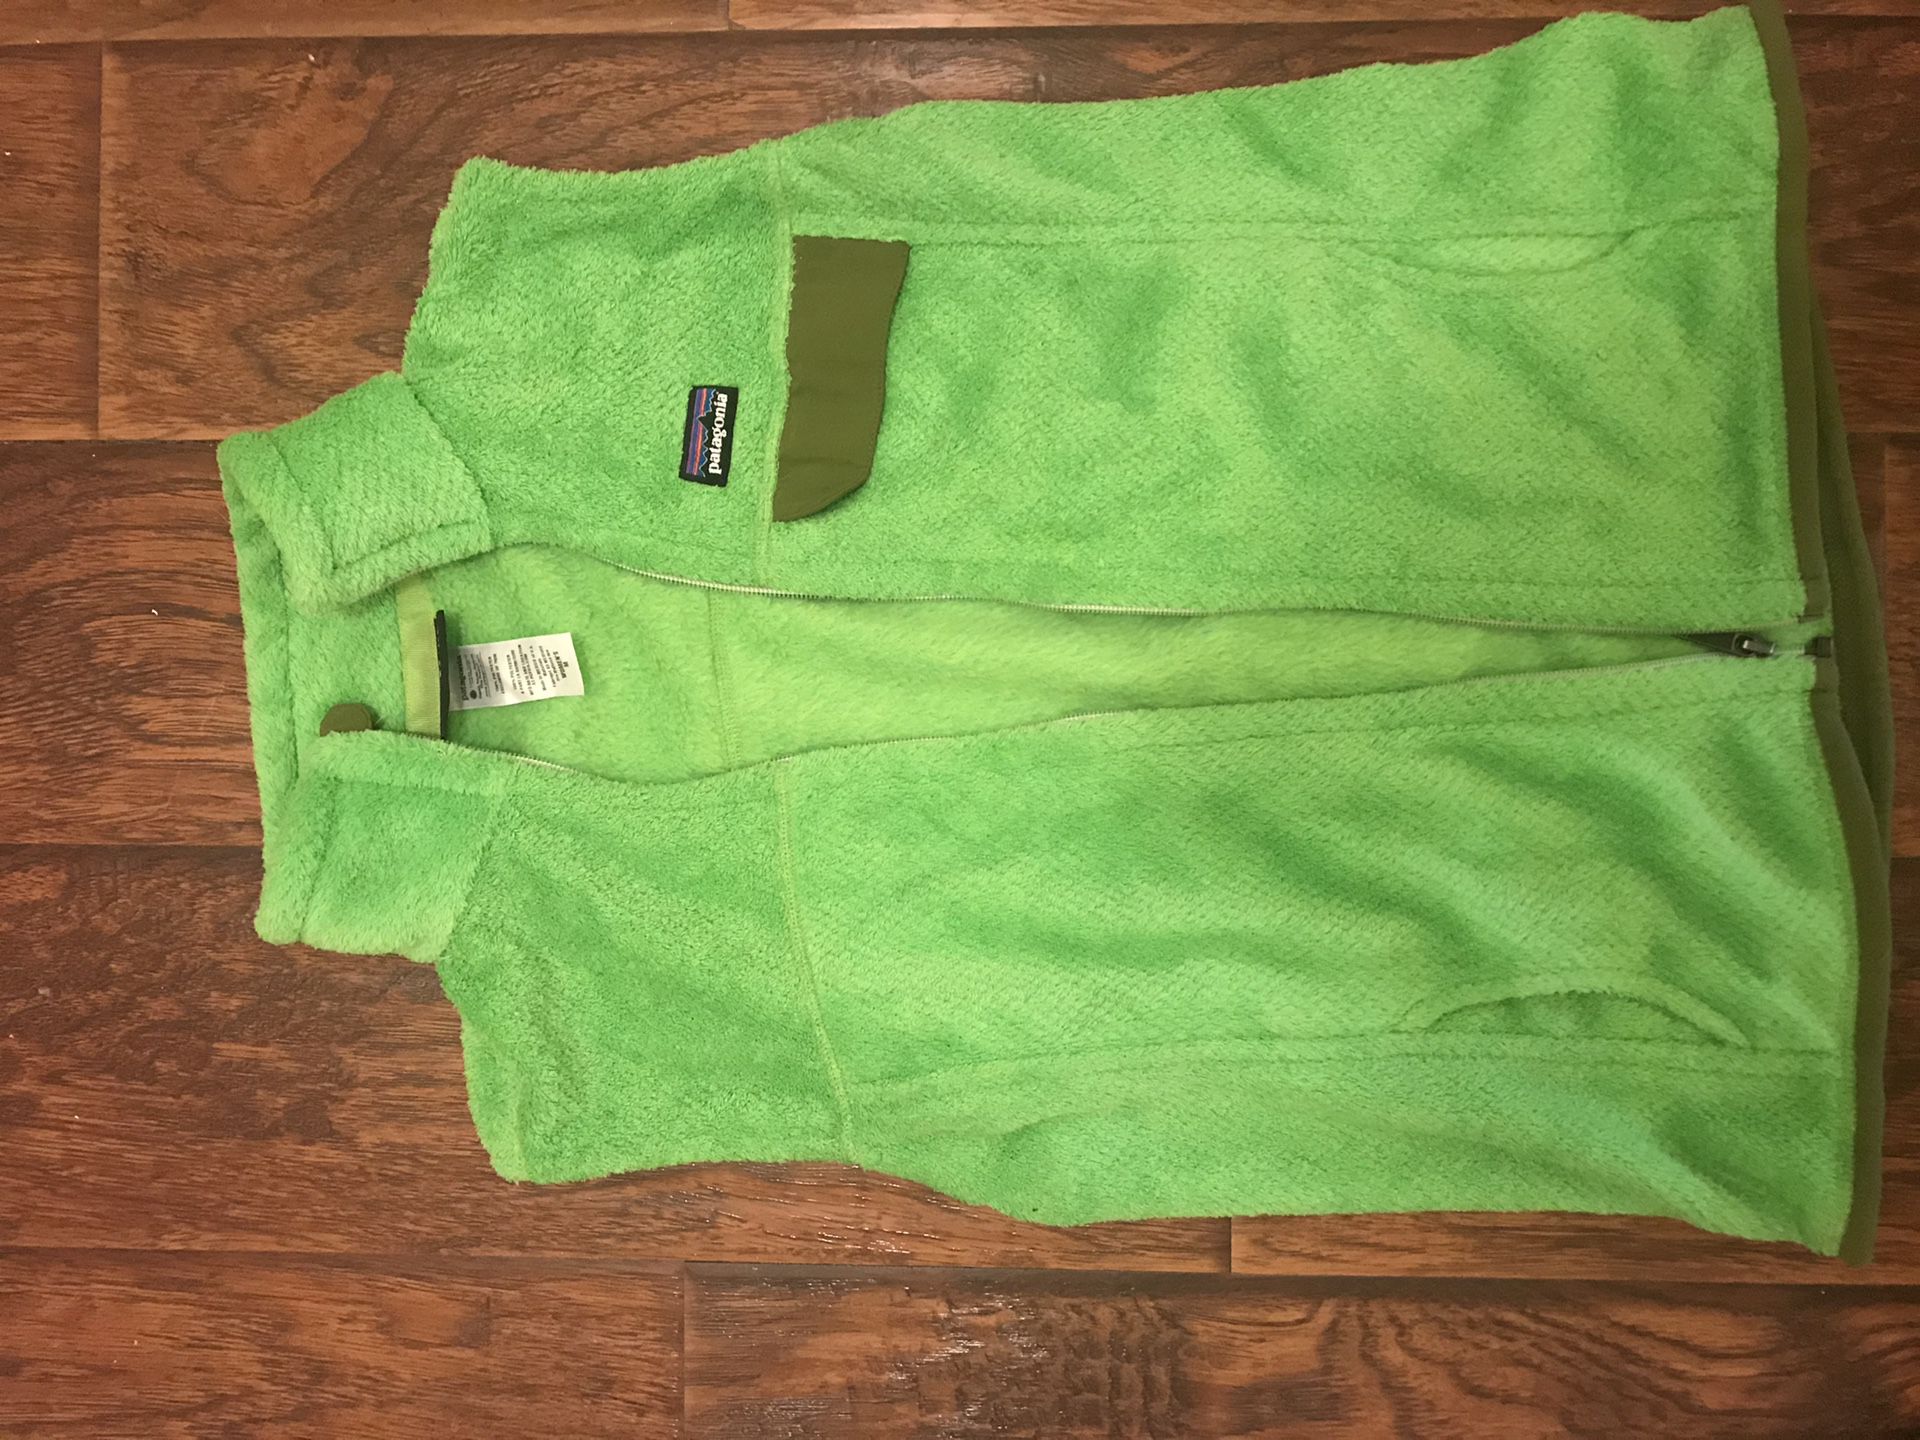 Patagonia vest for women size M